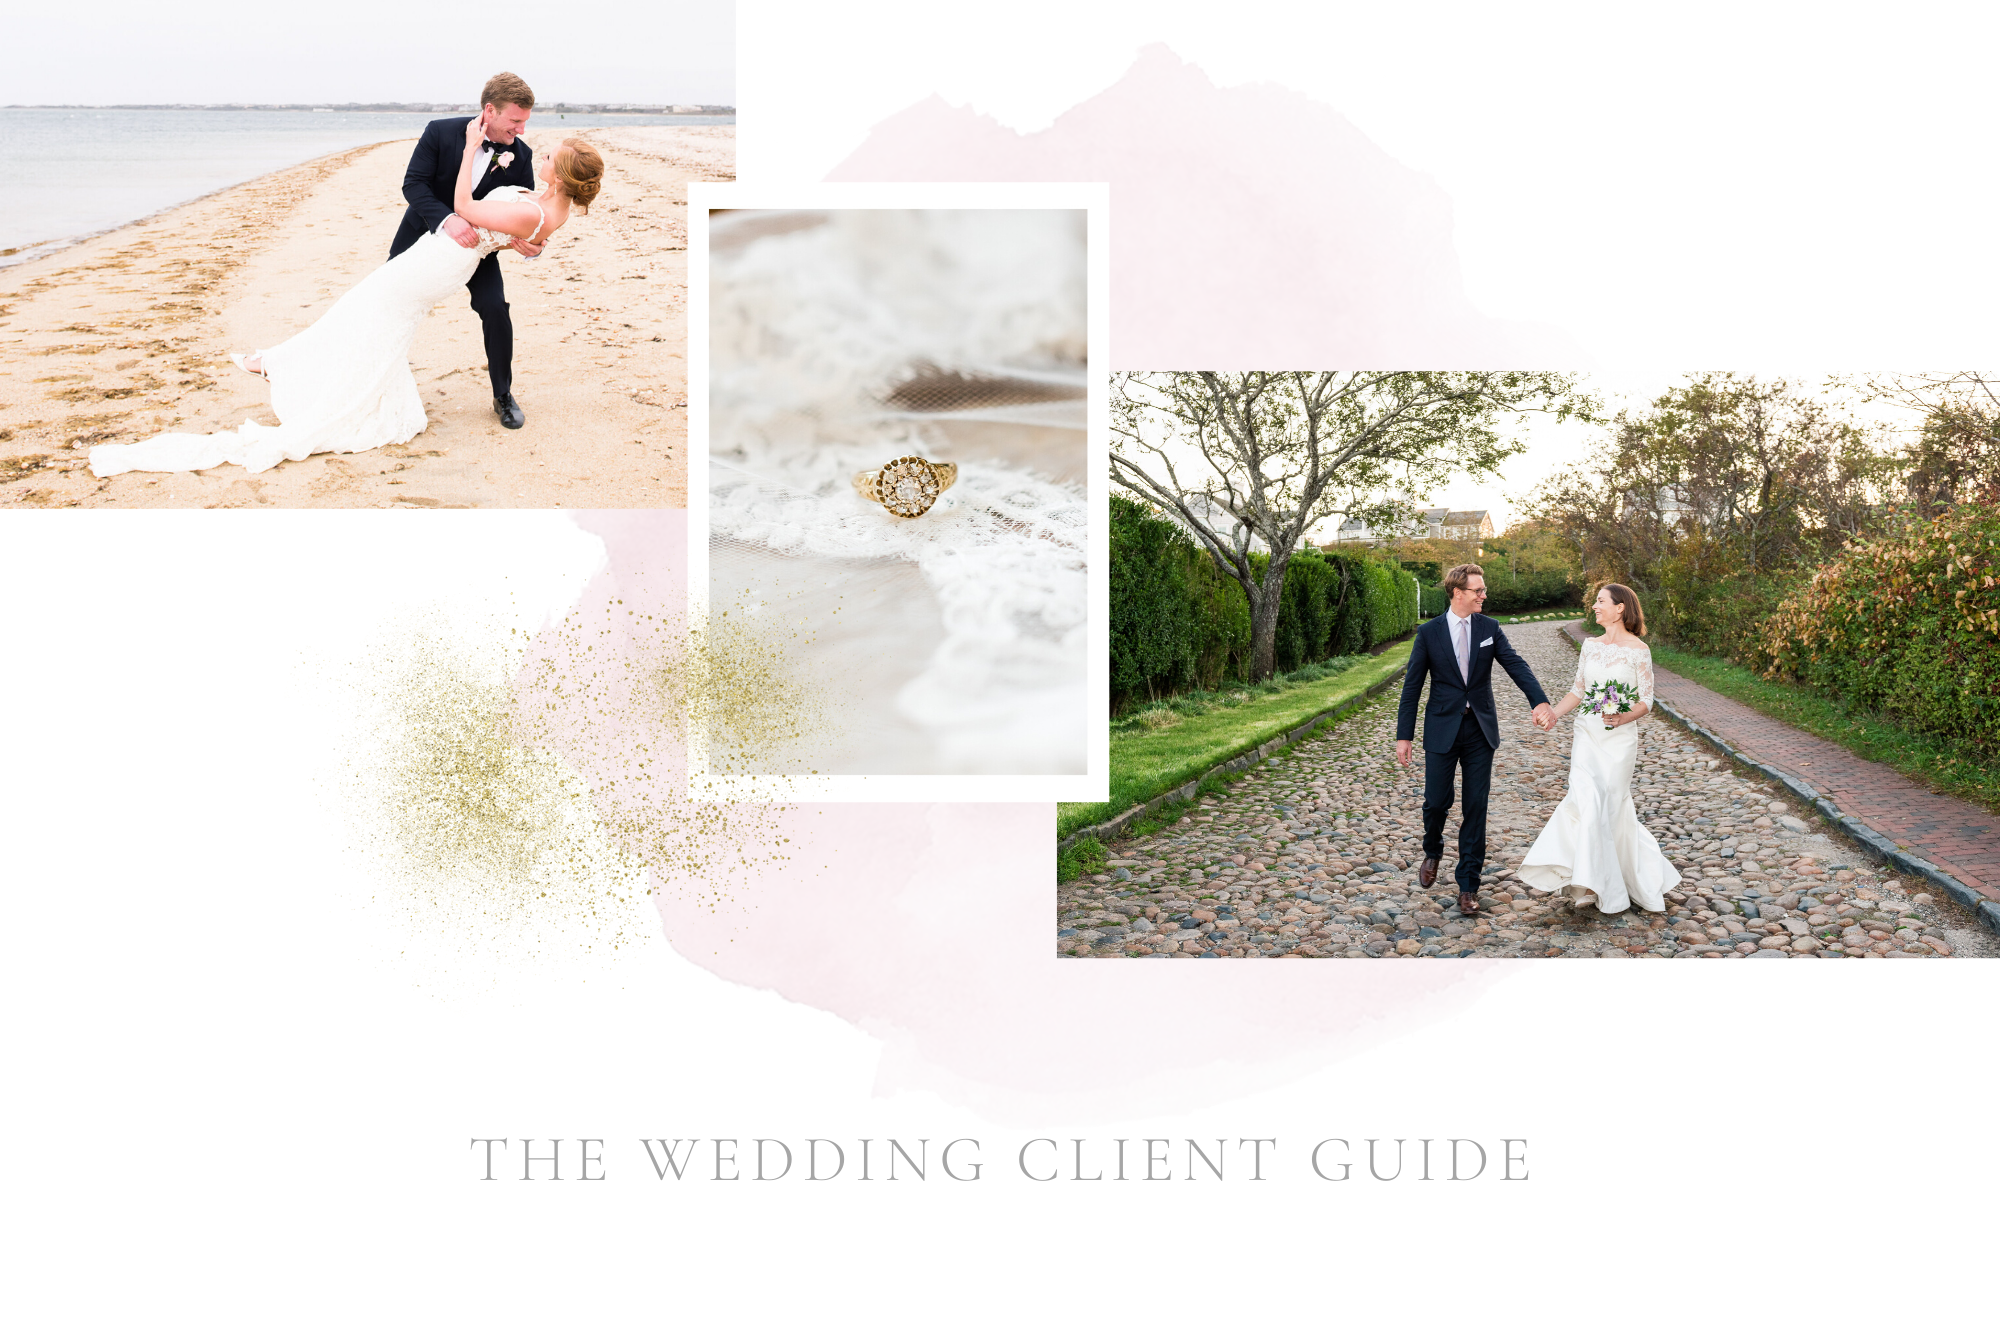 Wedding Client Guide Image.png